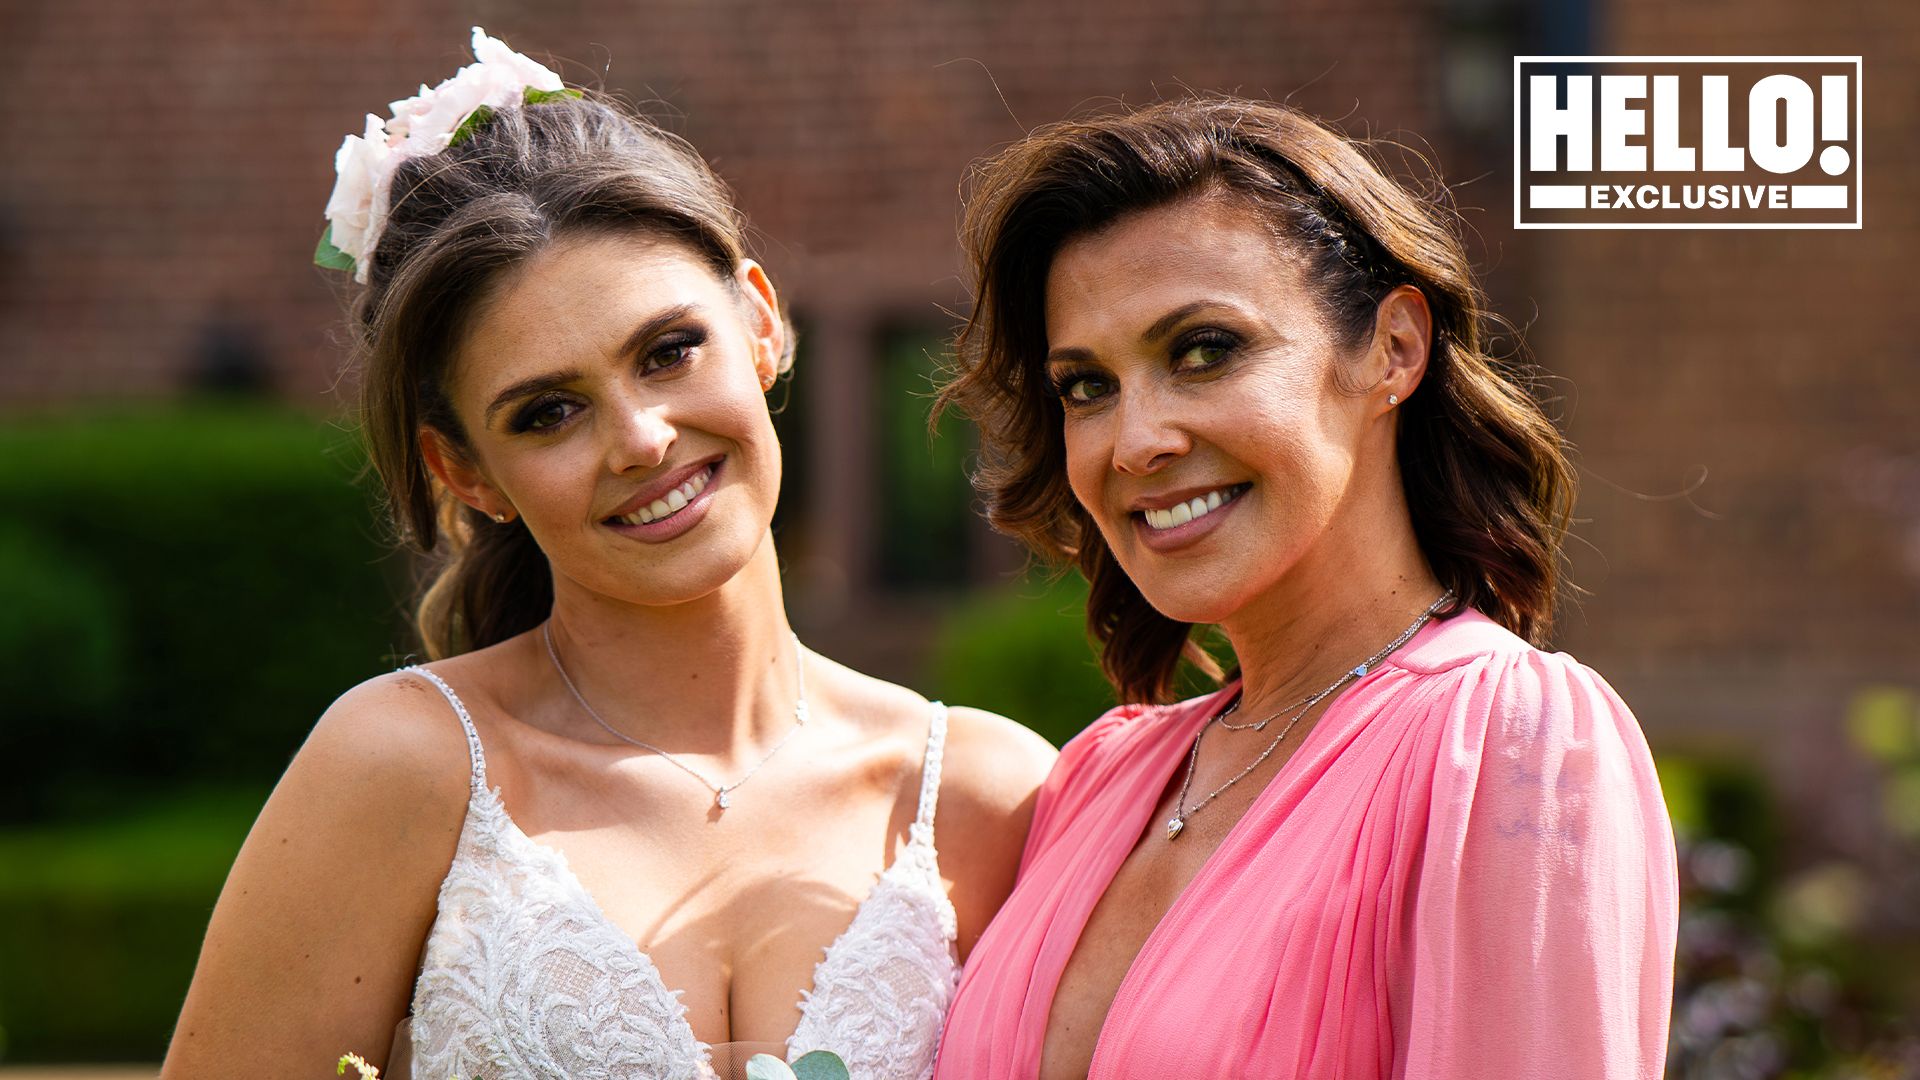 Kym Marsh and daughter Emilie Cunliffe at Emilie's wedding